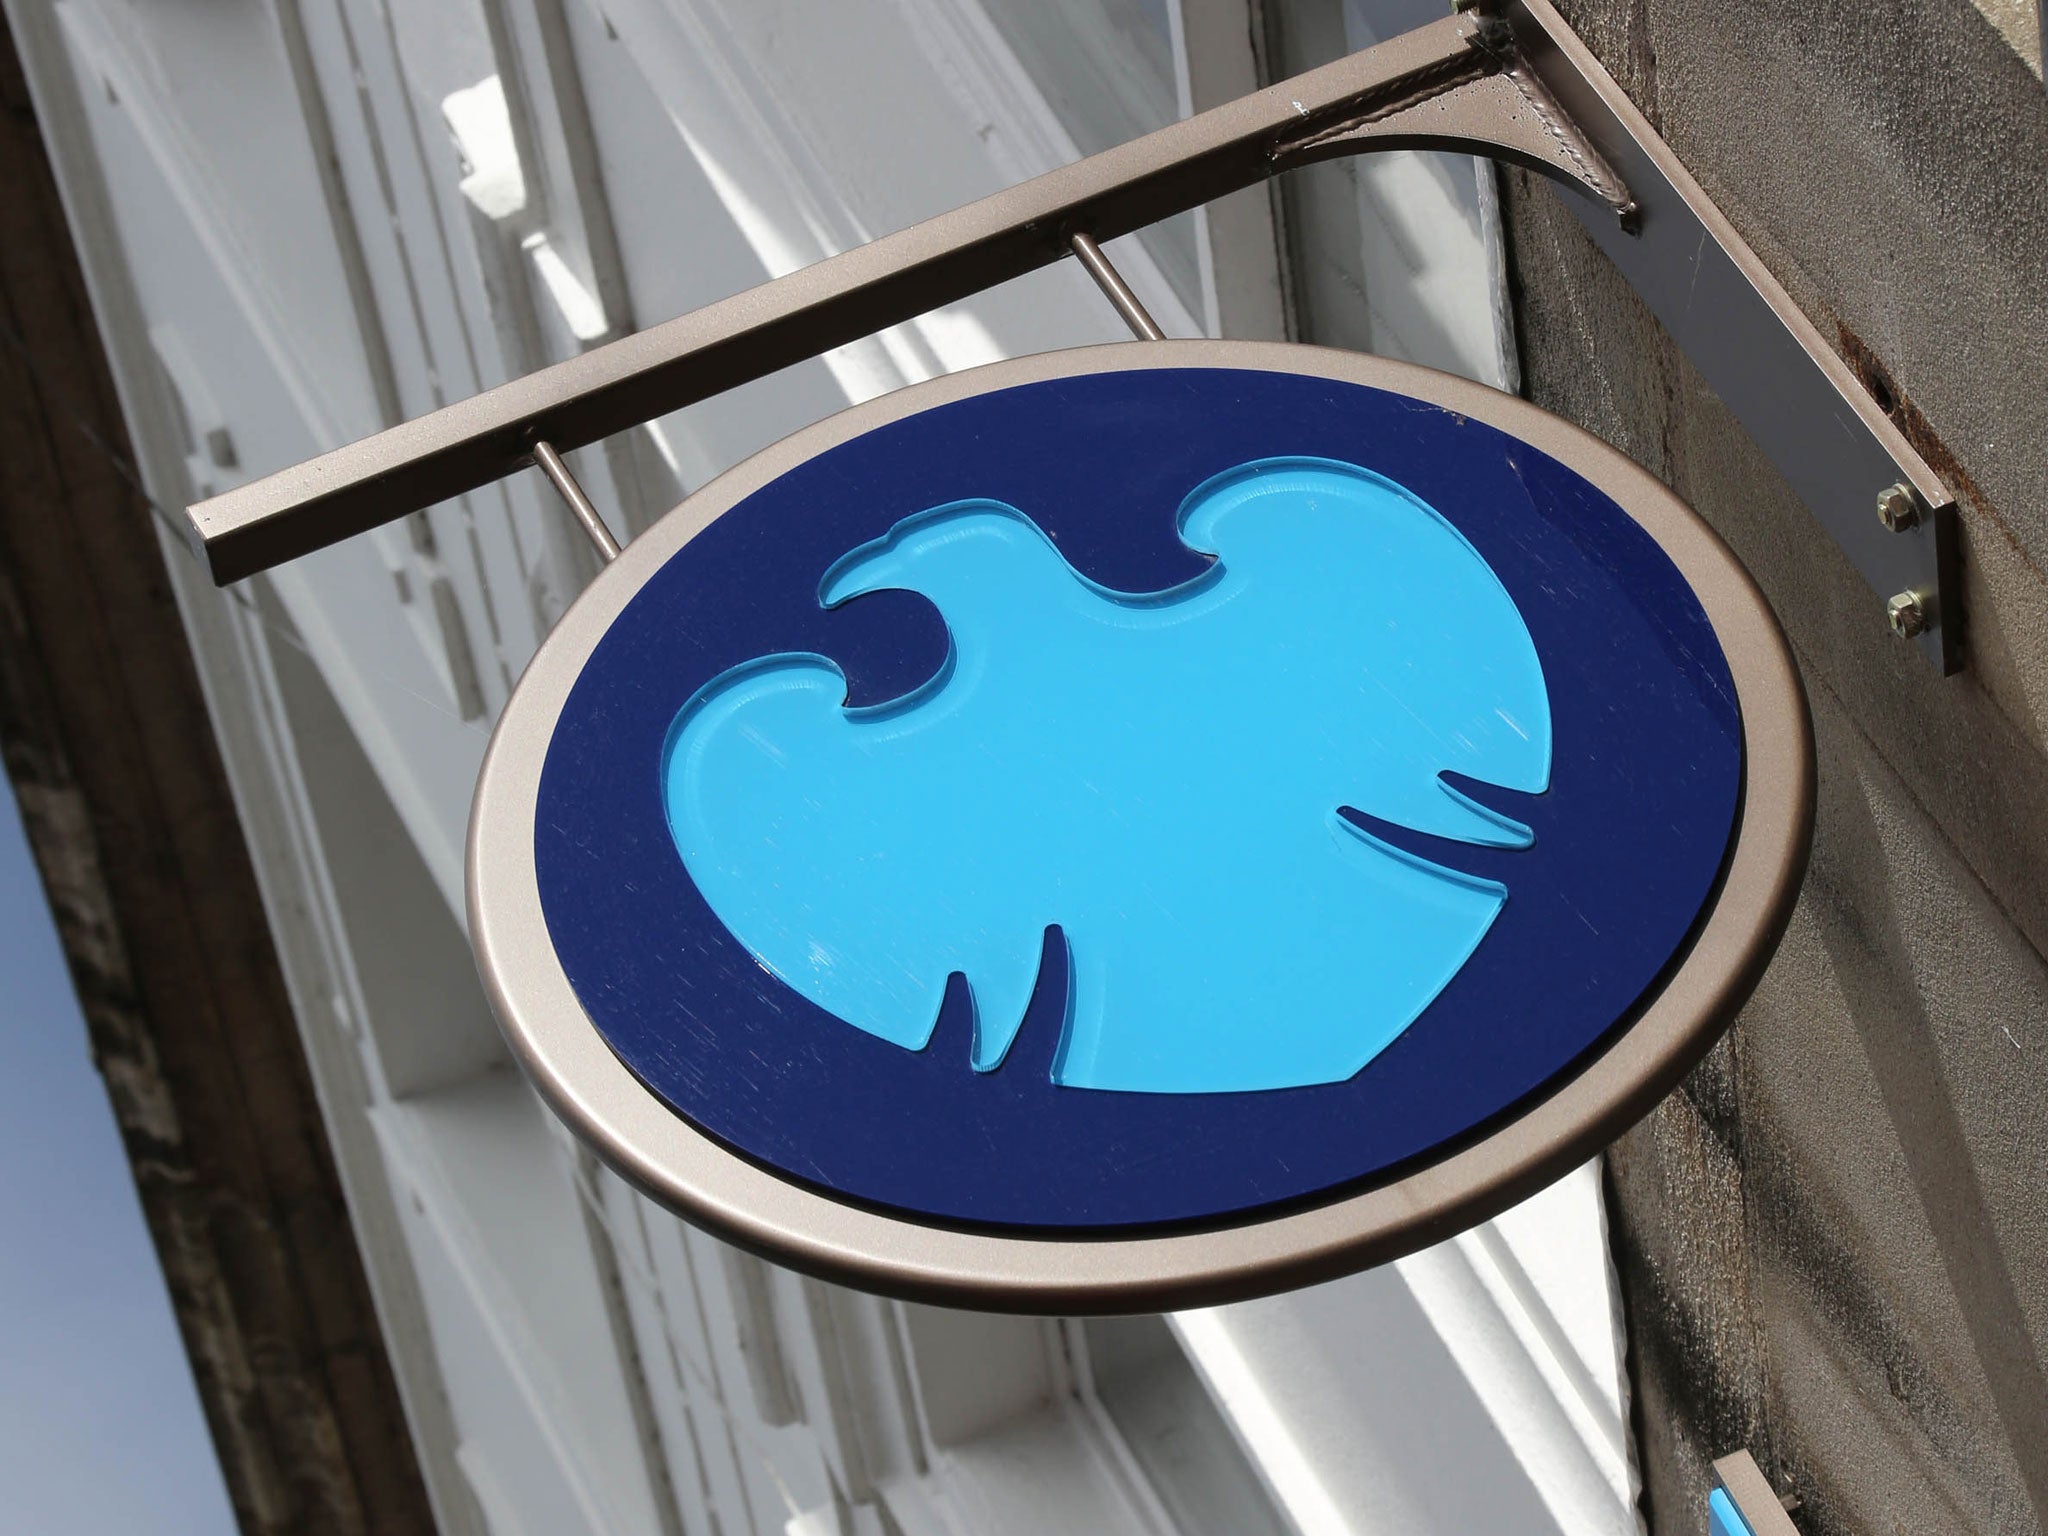 The eagle has flown: with Barclays saying that some traditional branches will go over time, communities may be the poorer as banks retreat